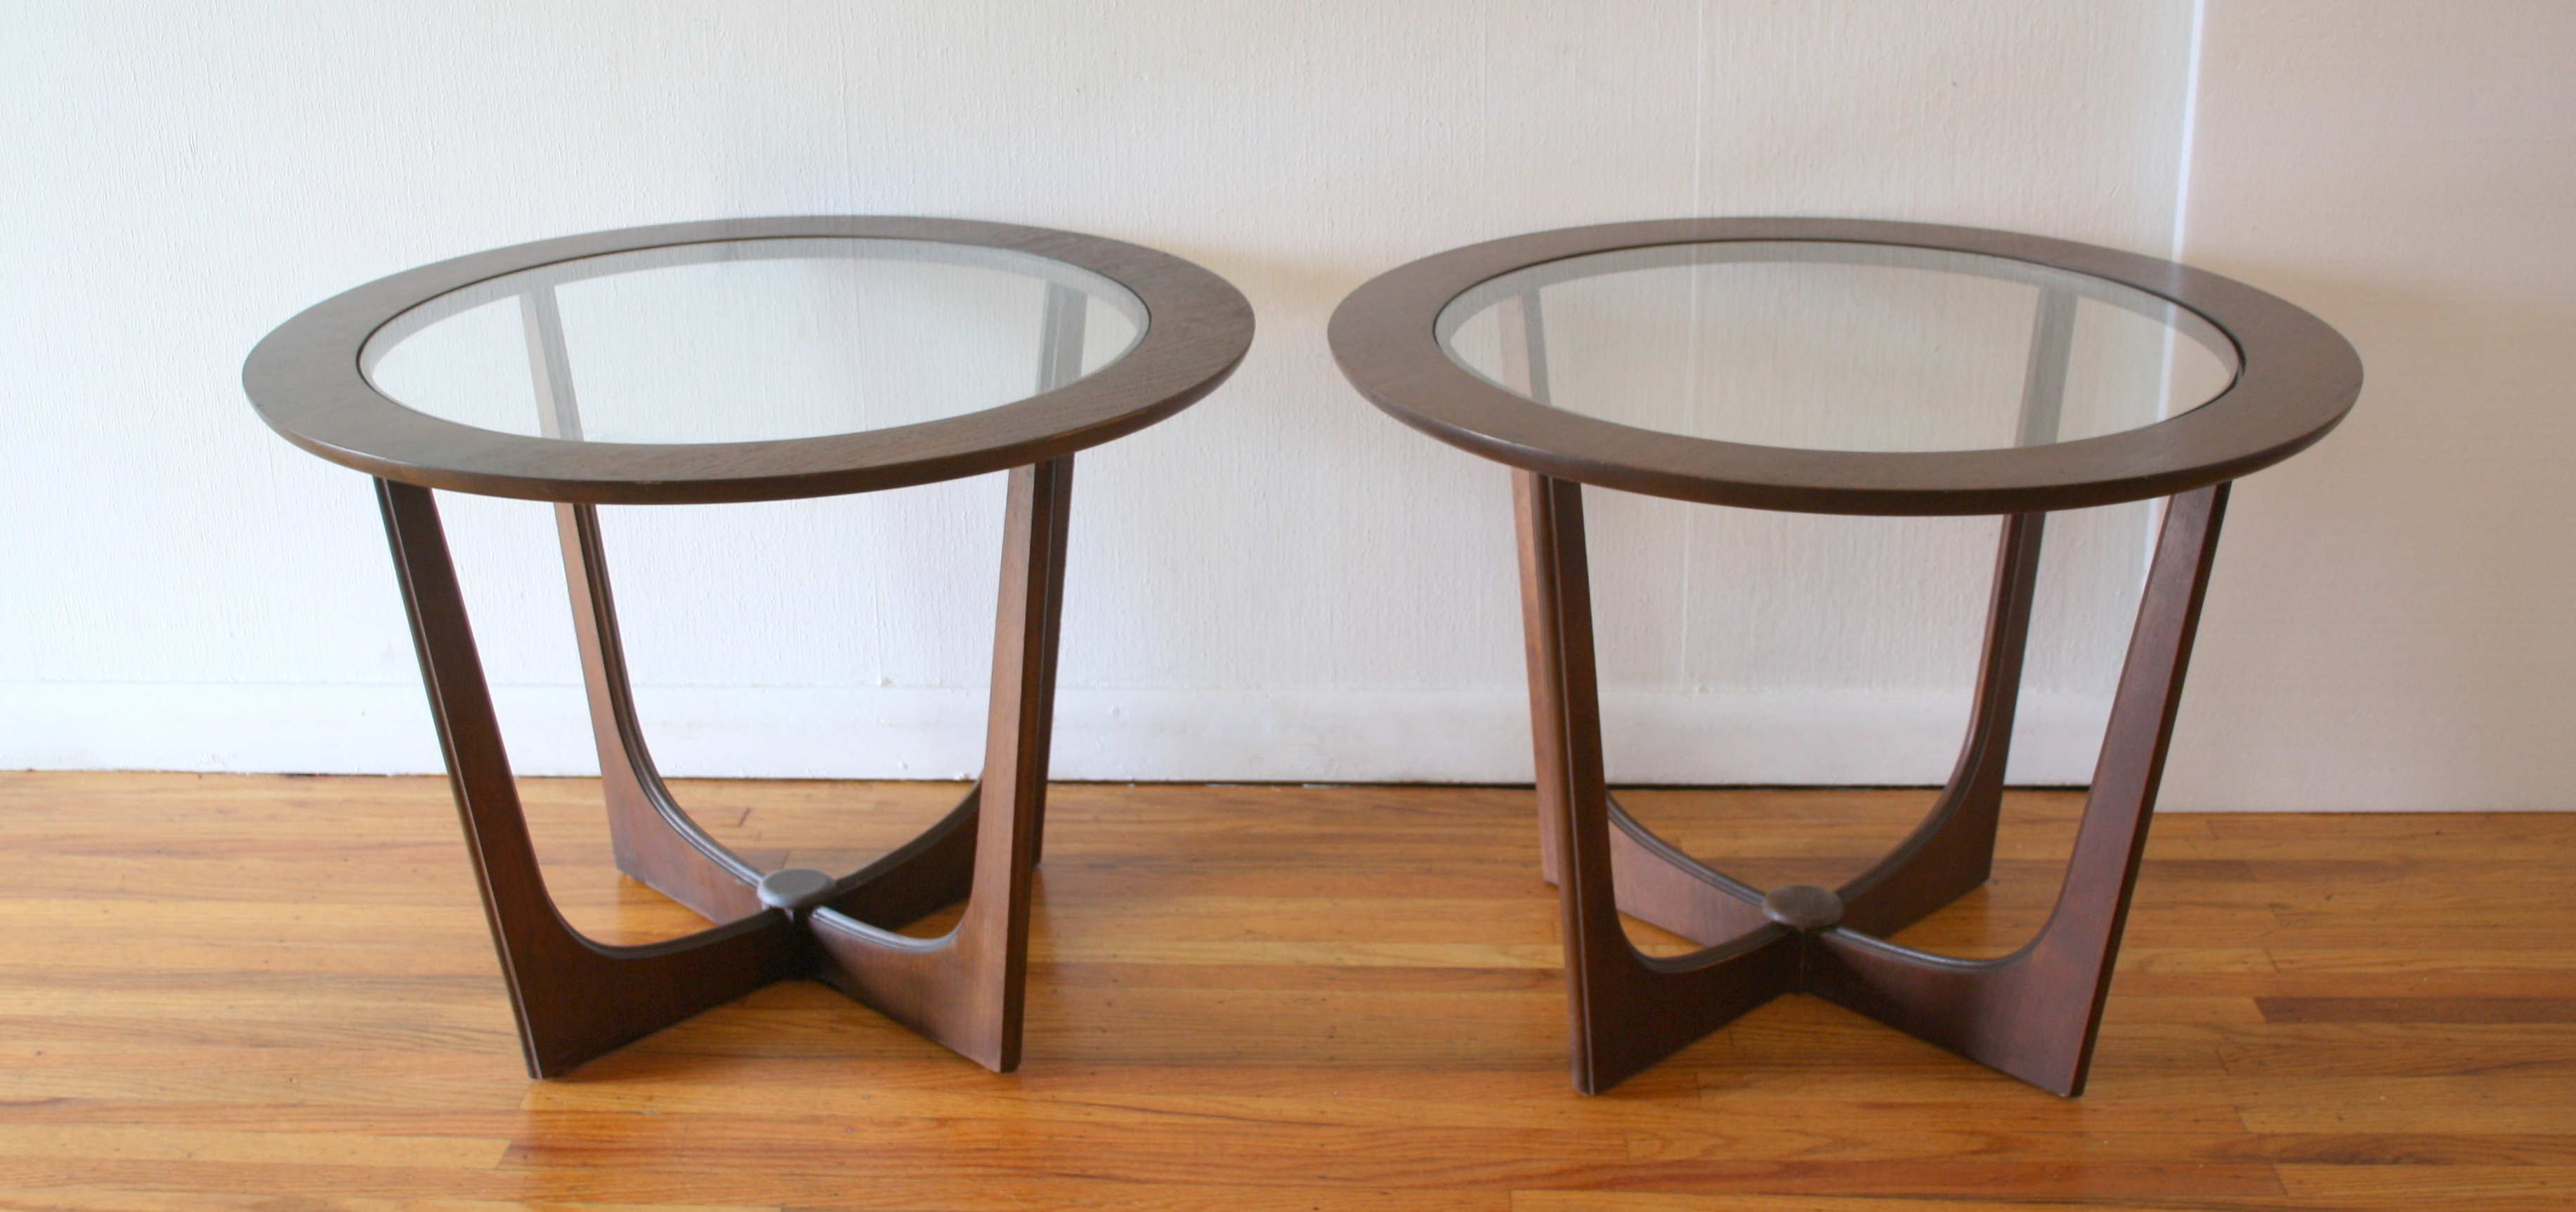 pair of Bassett round glass topped side tables 1